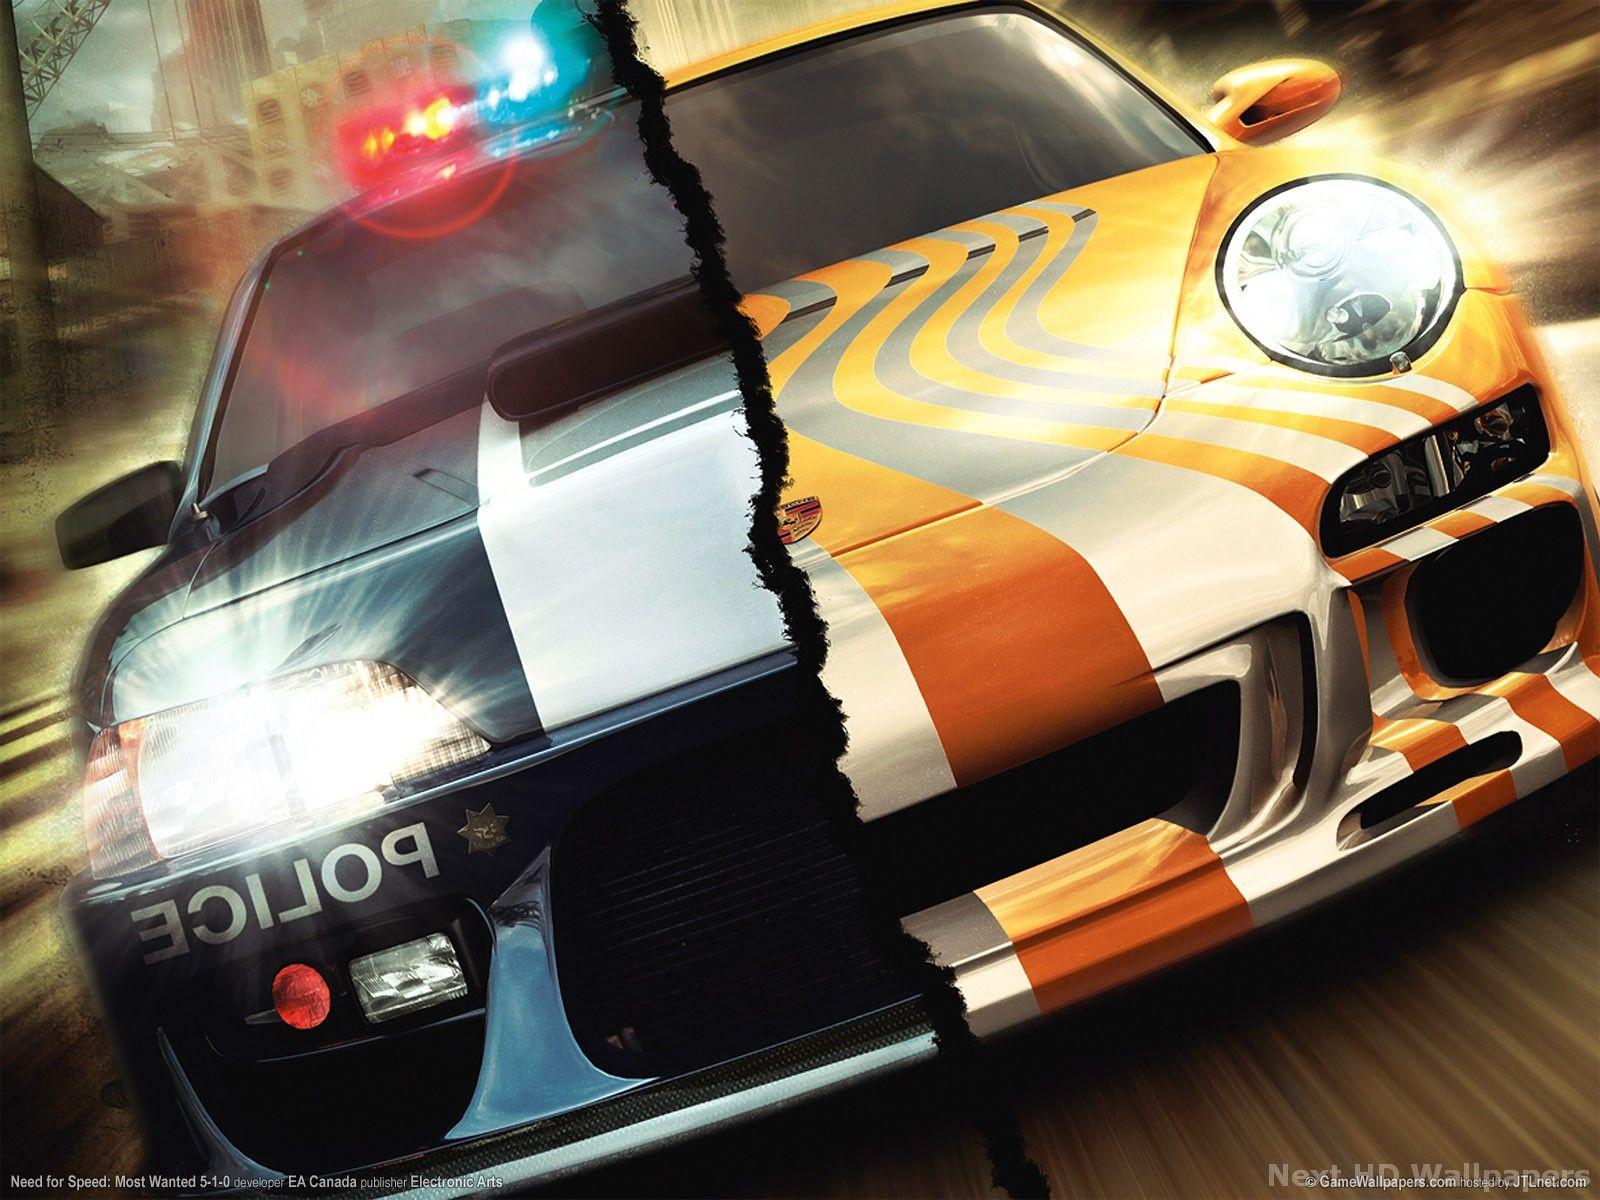 Need for Speed Most Wanted Wallpaper. Games i Play